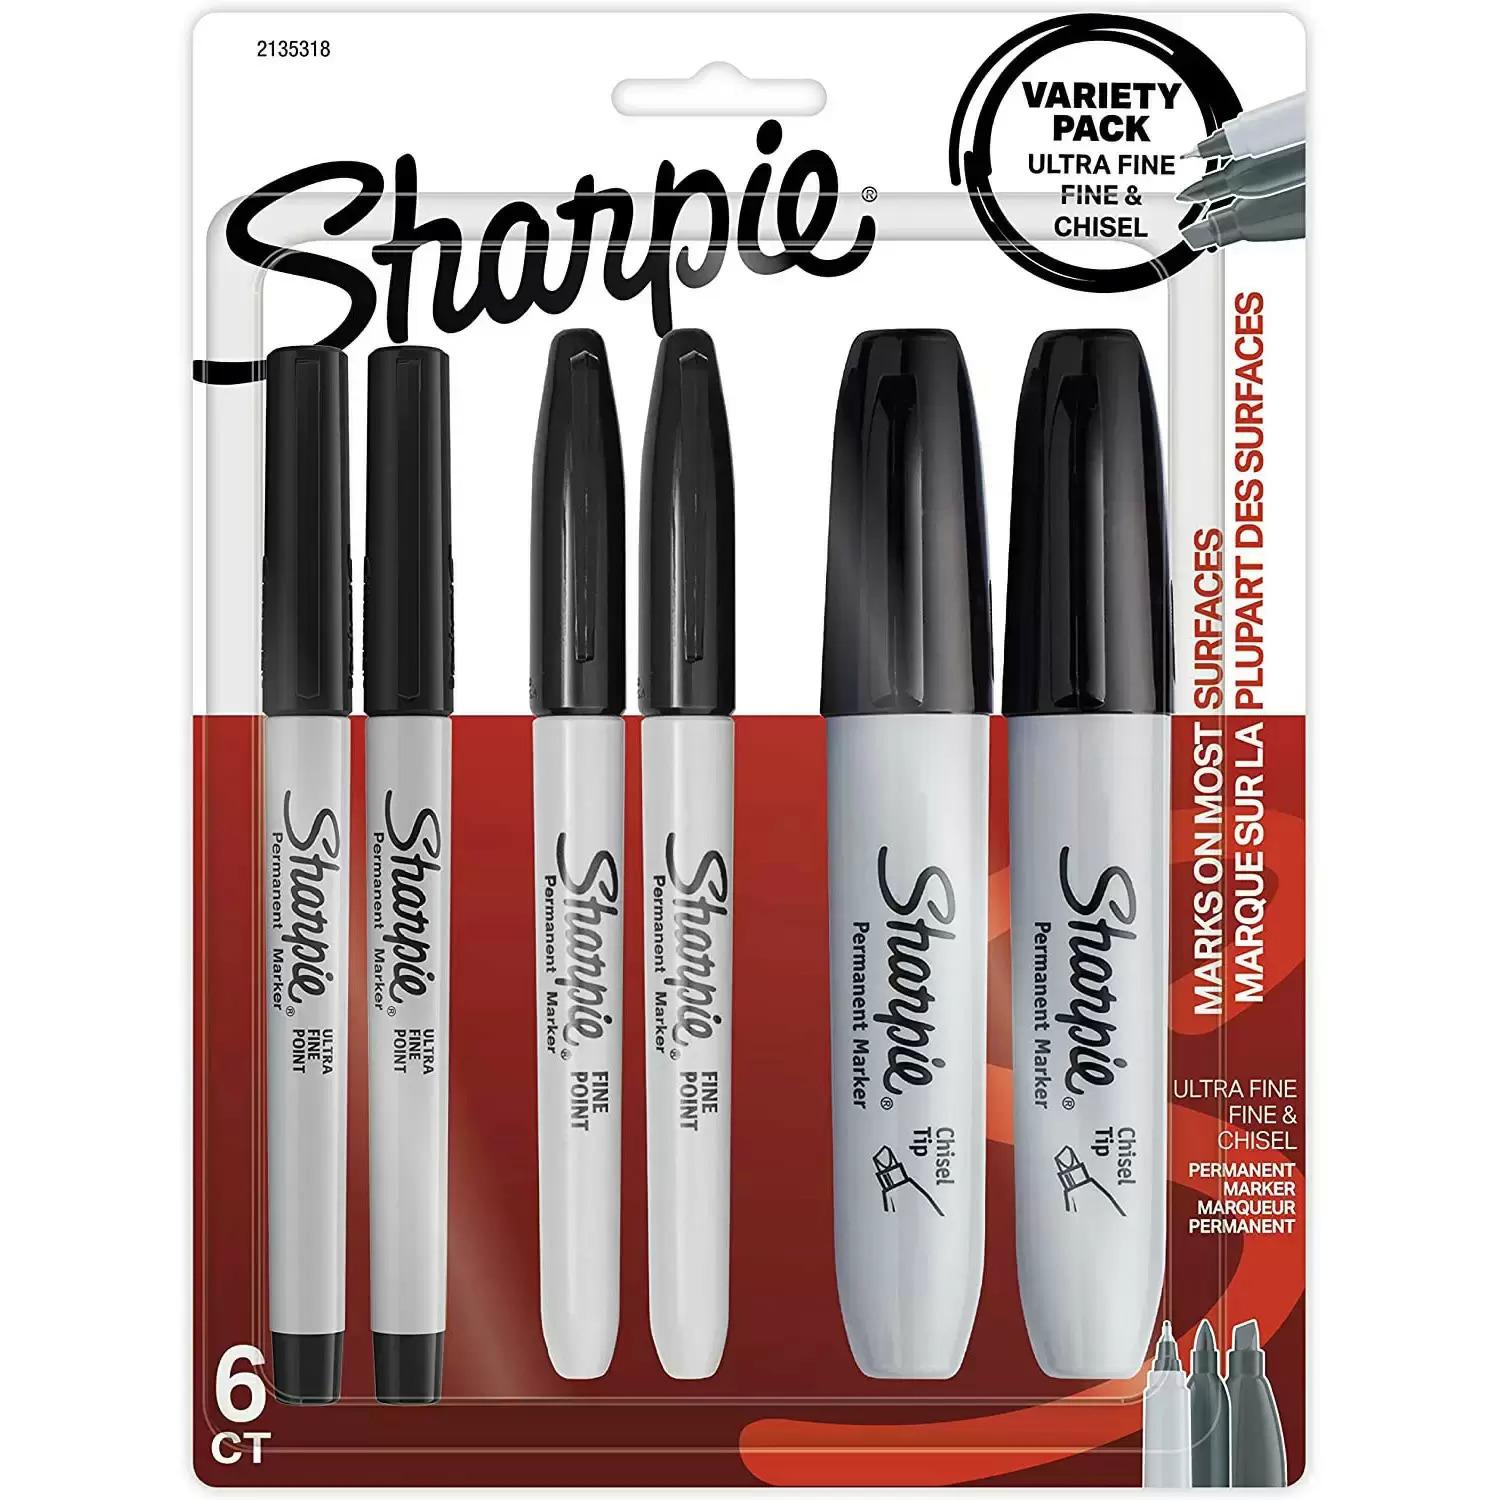 Sharpie Permanent Markers Variety 6 Pack for $5.31 Shipped